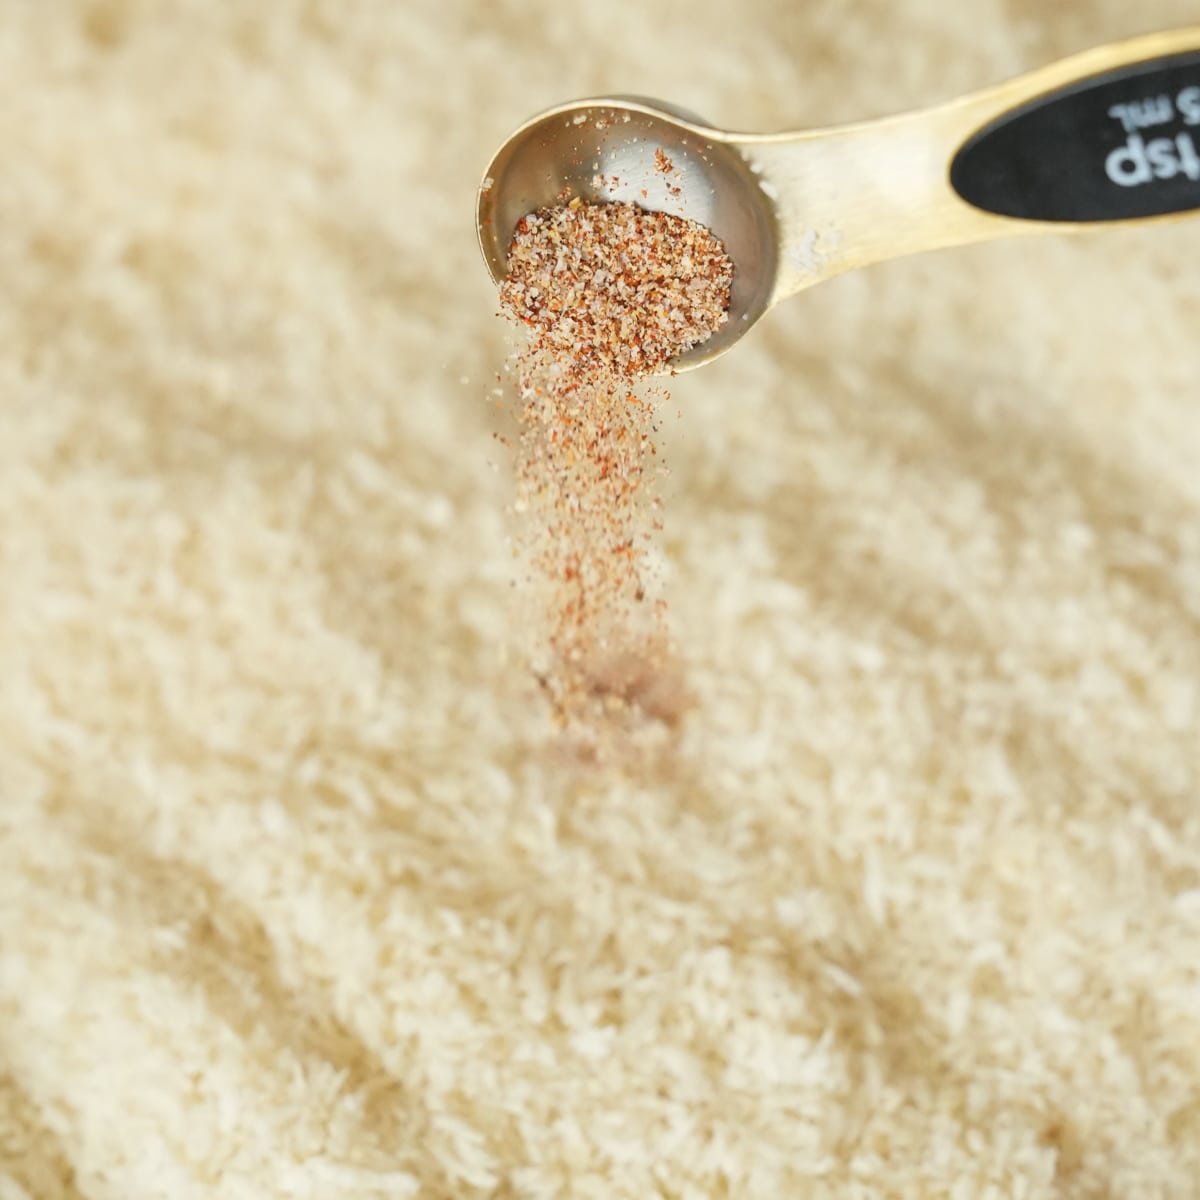 The seasoning mix being added to a tray of panko breadcrumbs.